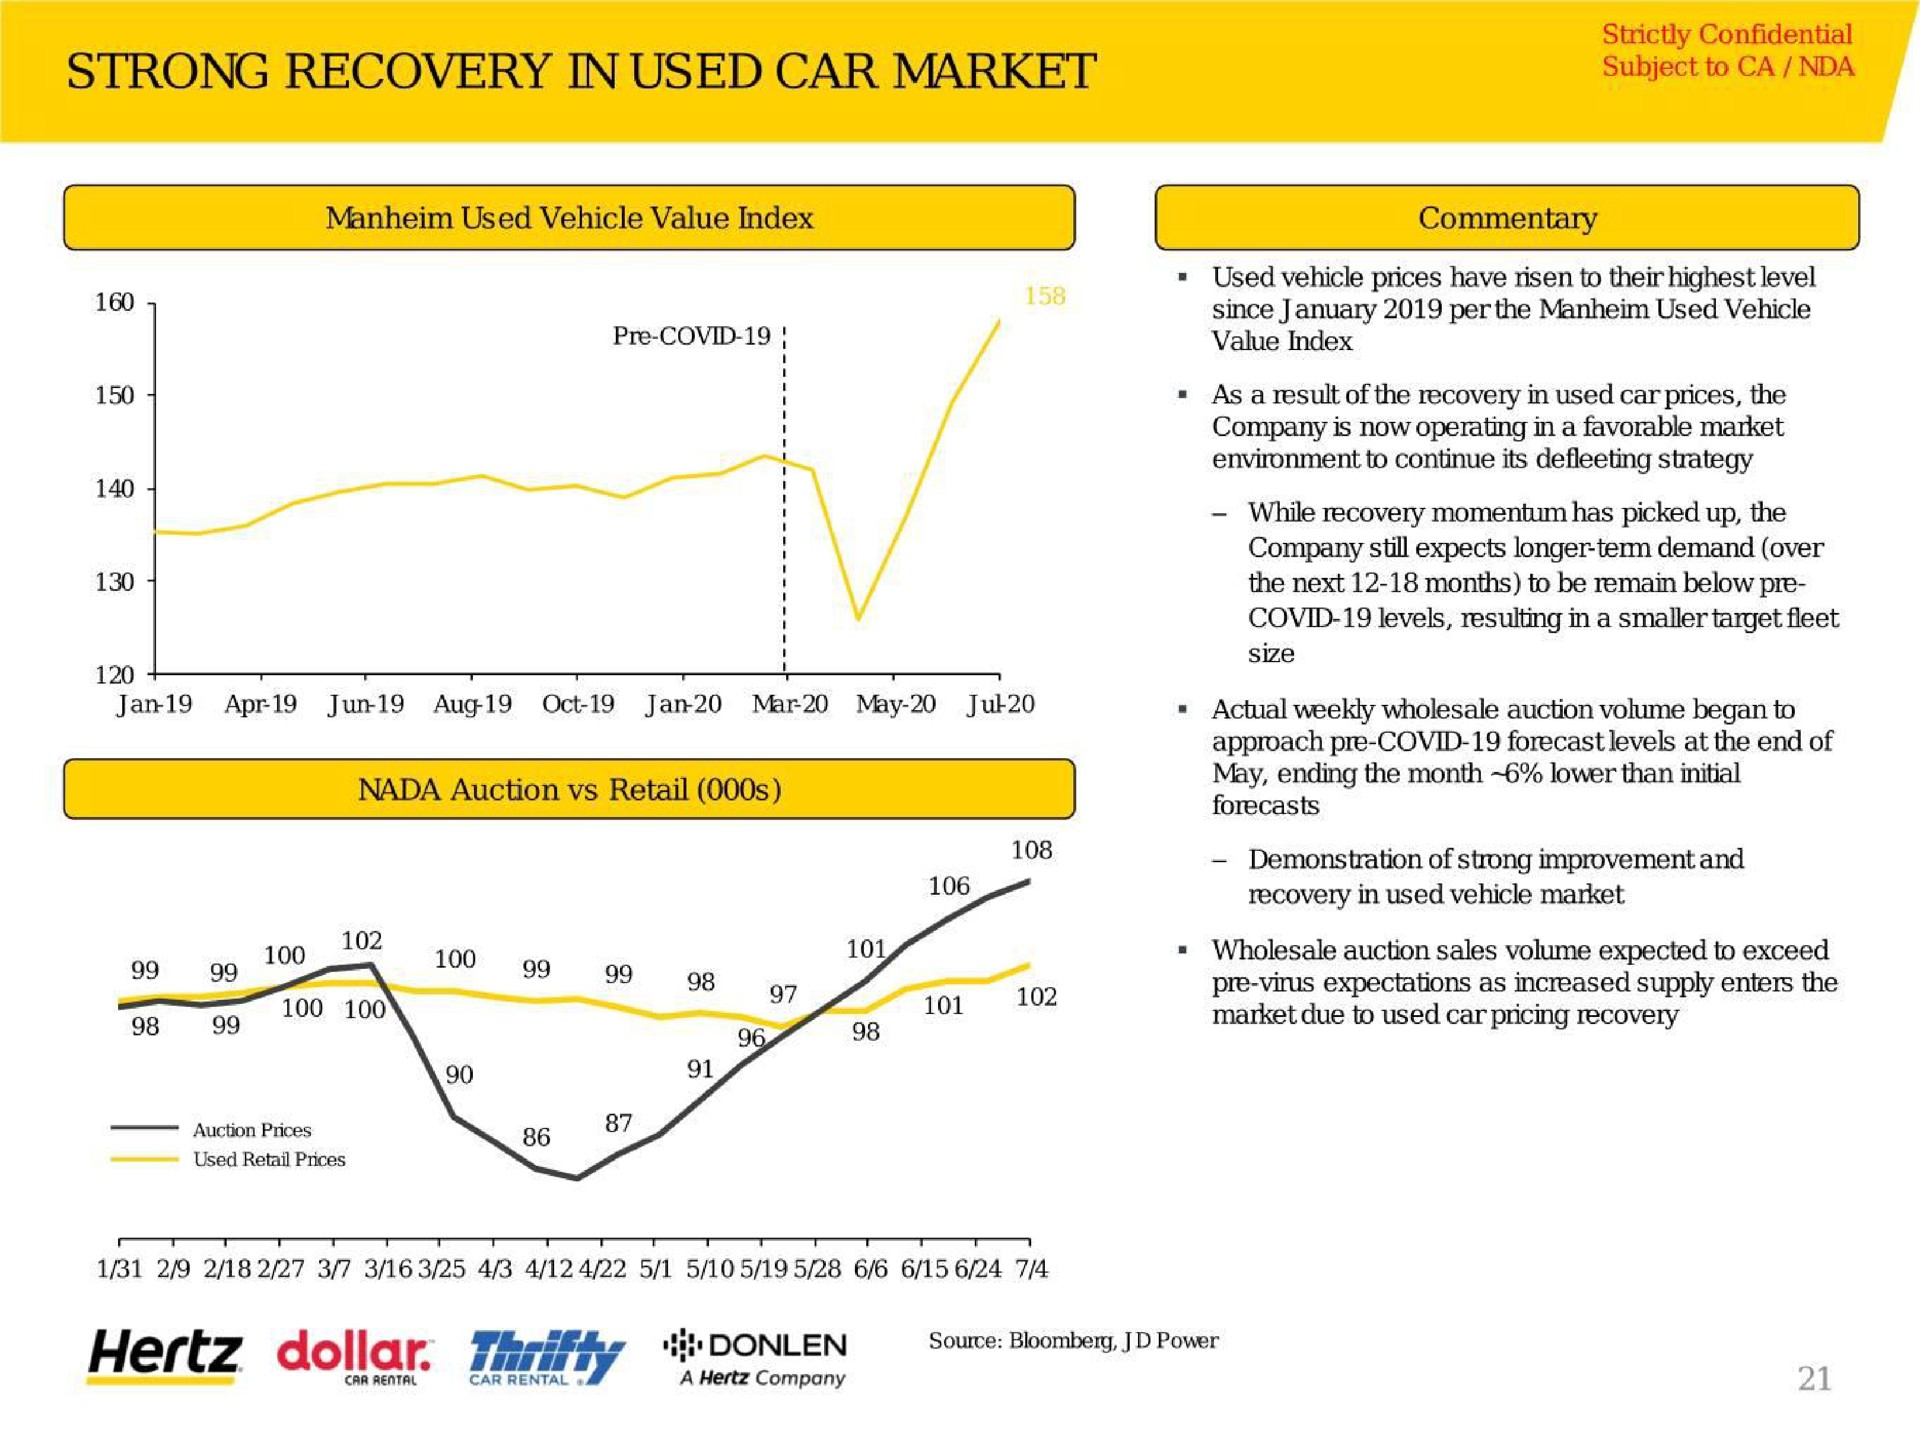 strong recovery in used car market subject to auction retail a a hertz dollar thrifty on a | Hertz